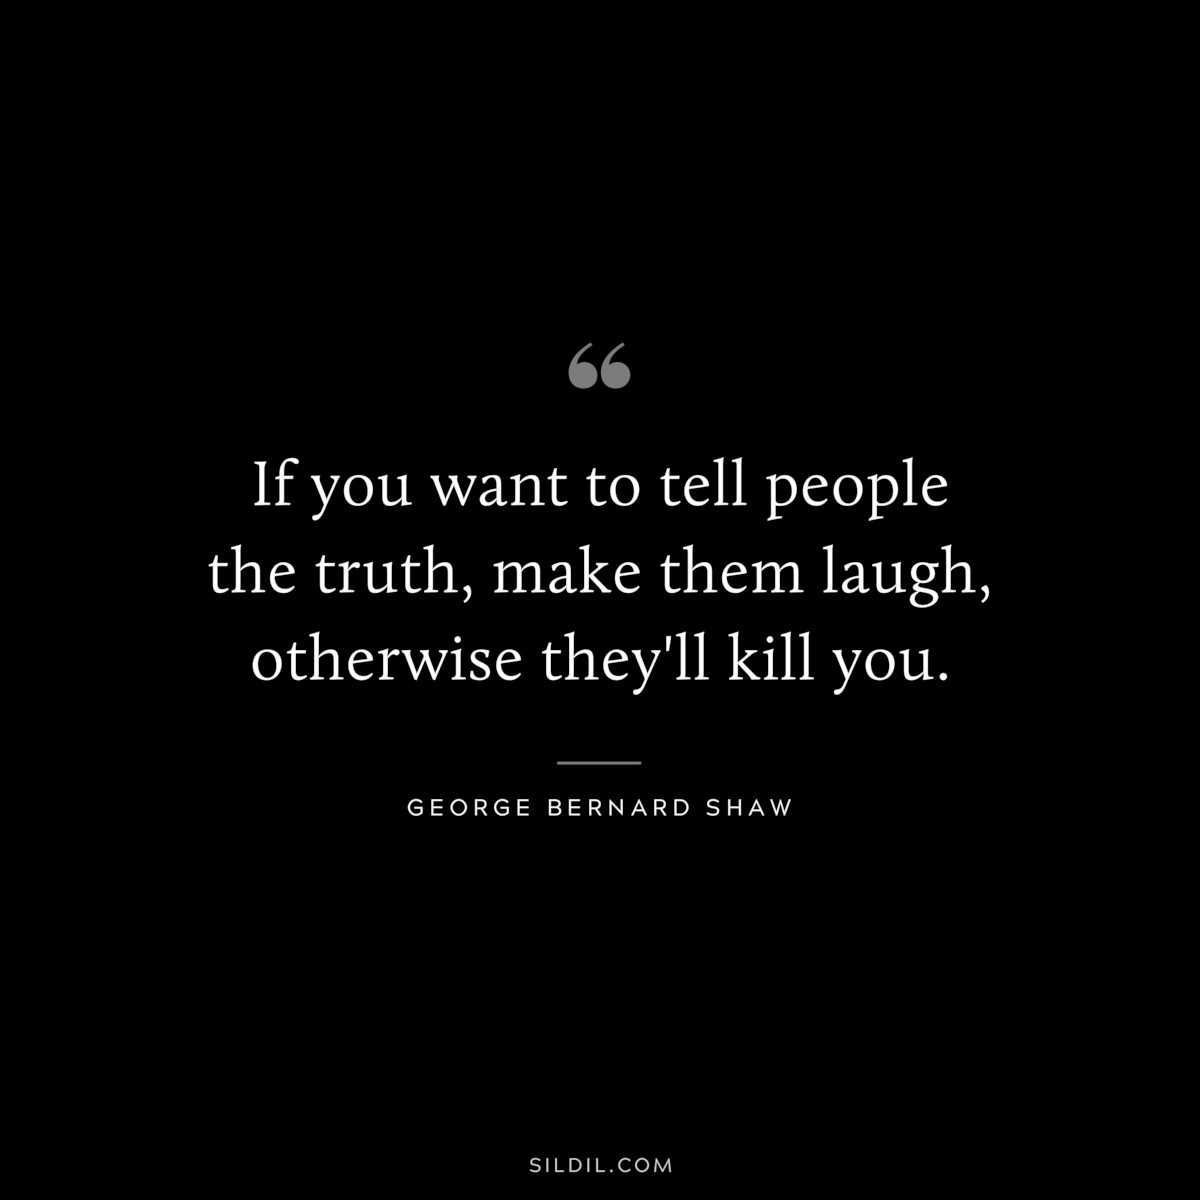 If you want to tell people the truth, make them laugh, otherwise they'll kill you. ― George Bernard Shaw